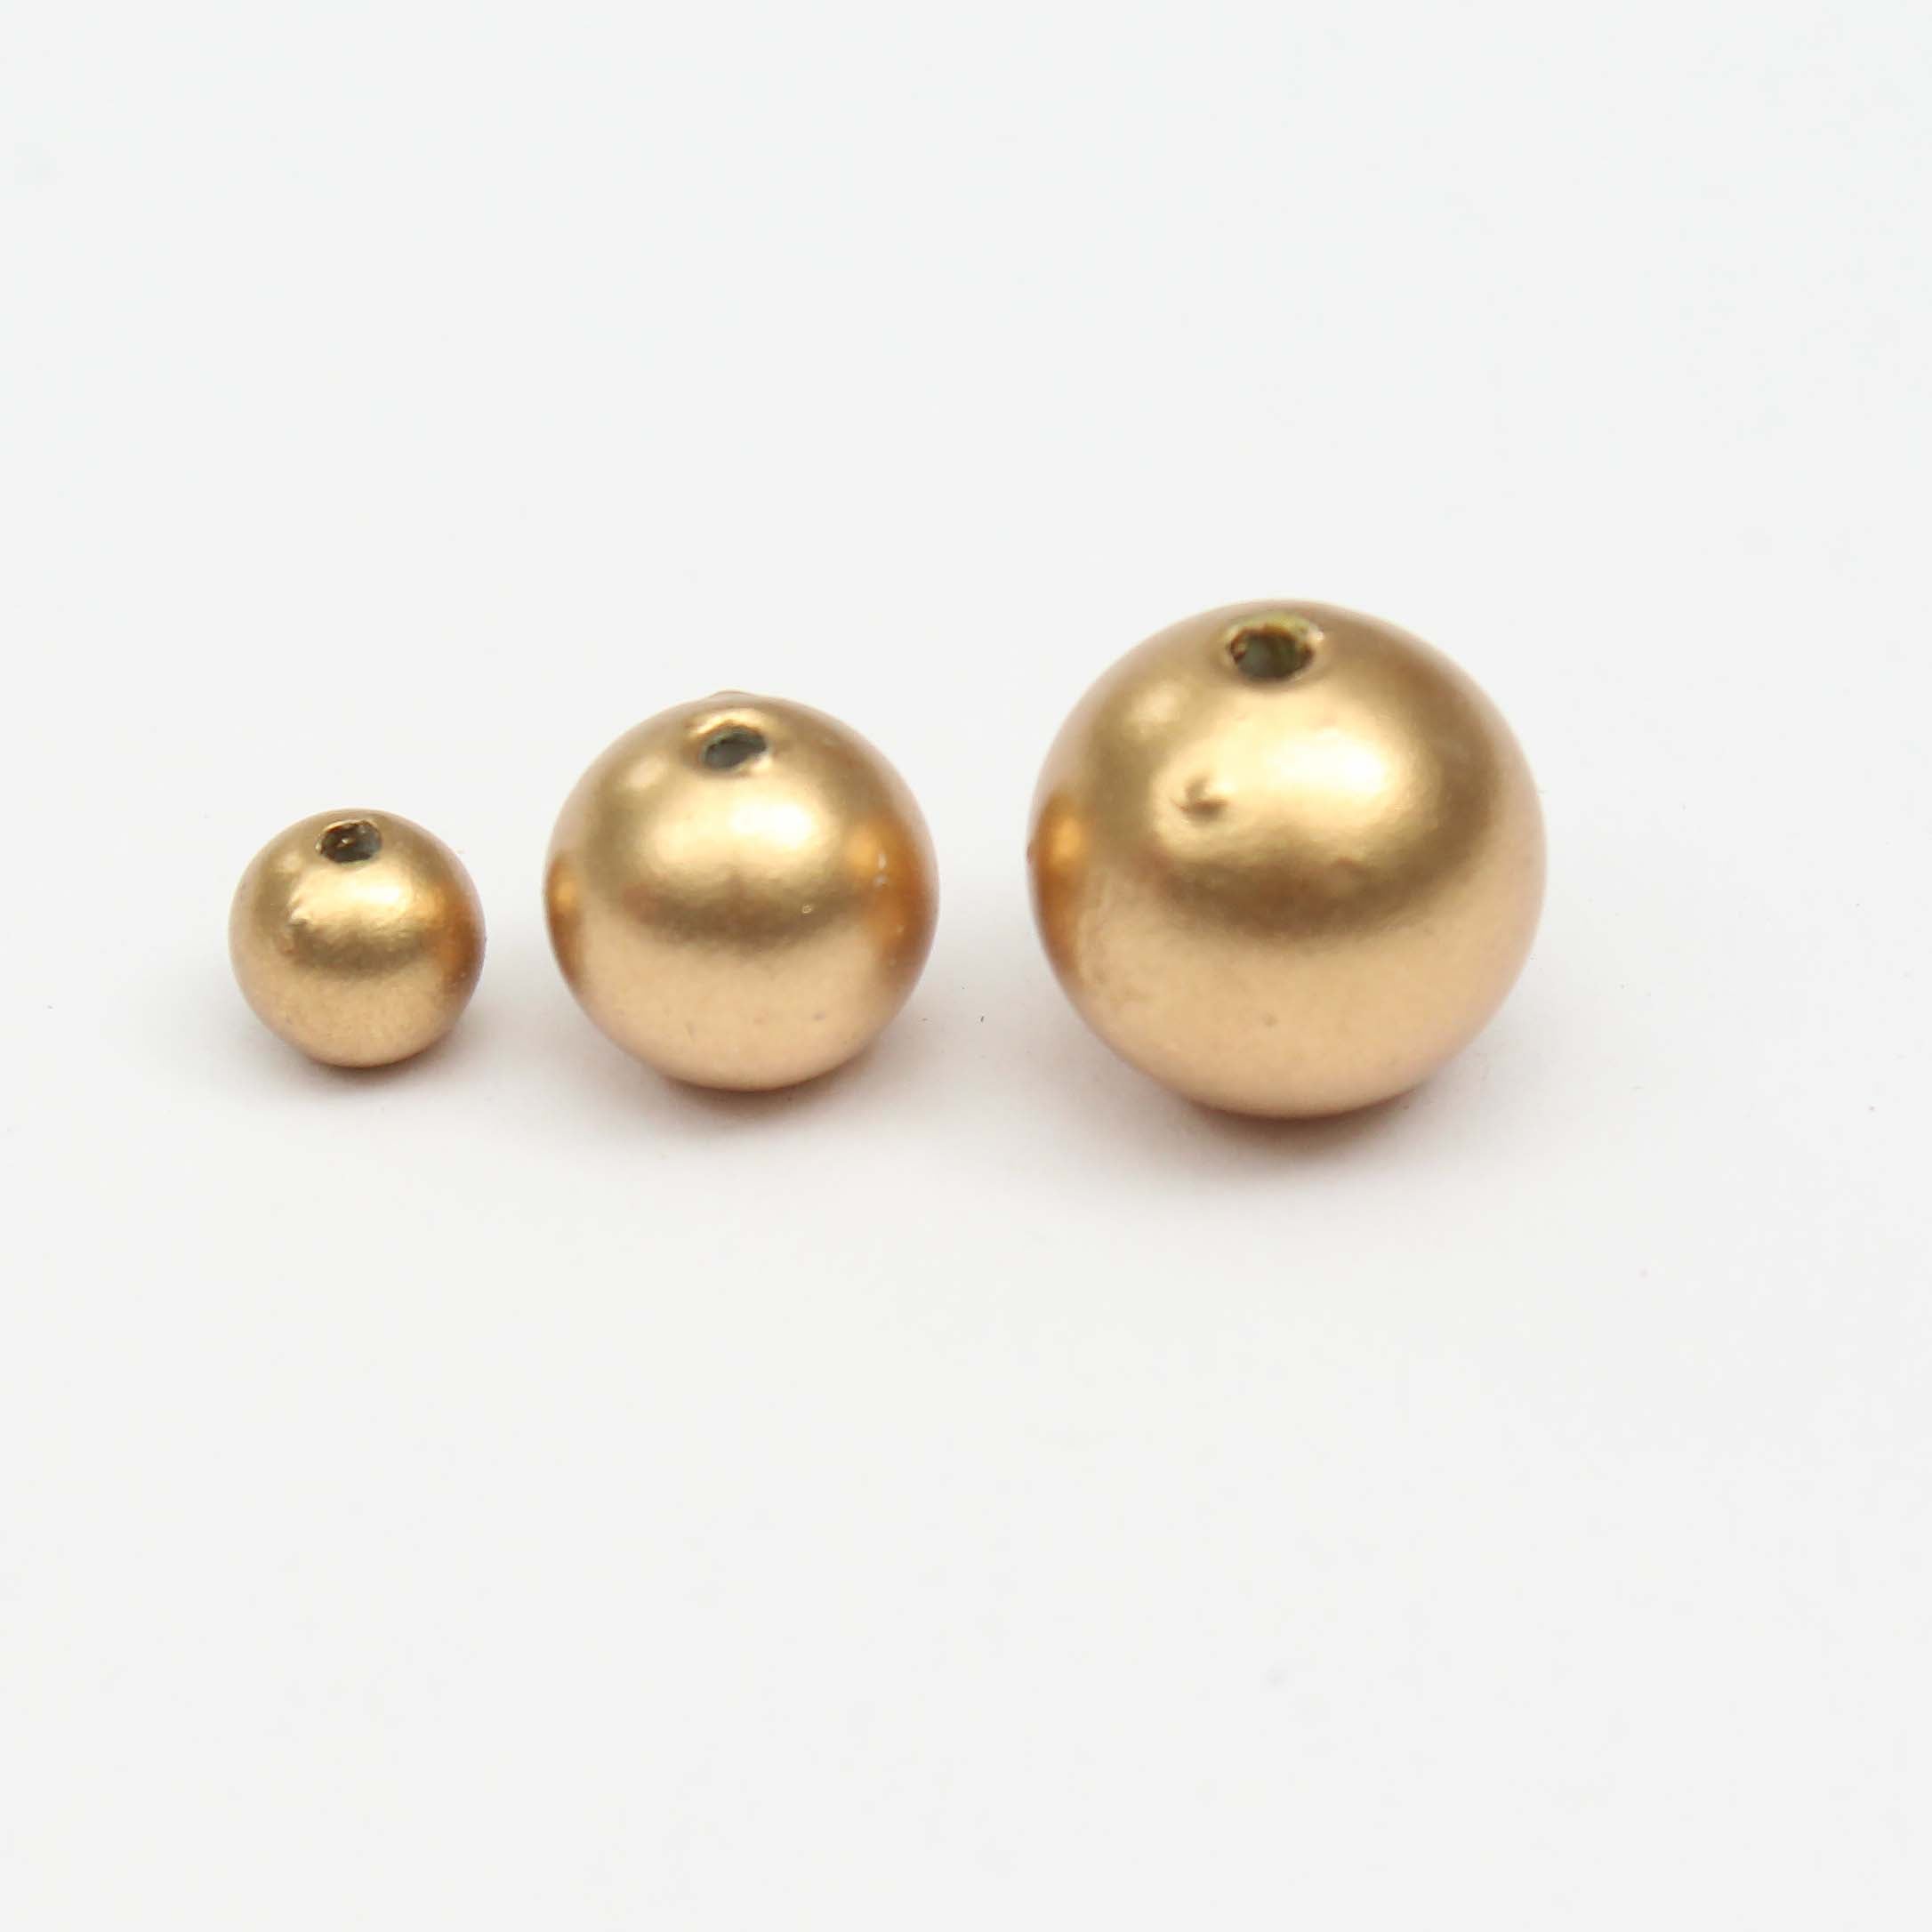 Christmas Elements - Gold Pearl Beads, Assorted Size - 6mm,10mm,12mm, 30g